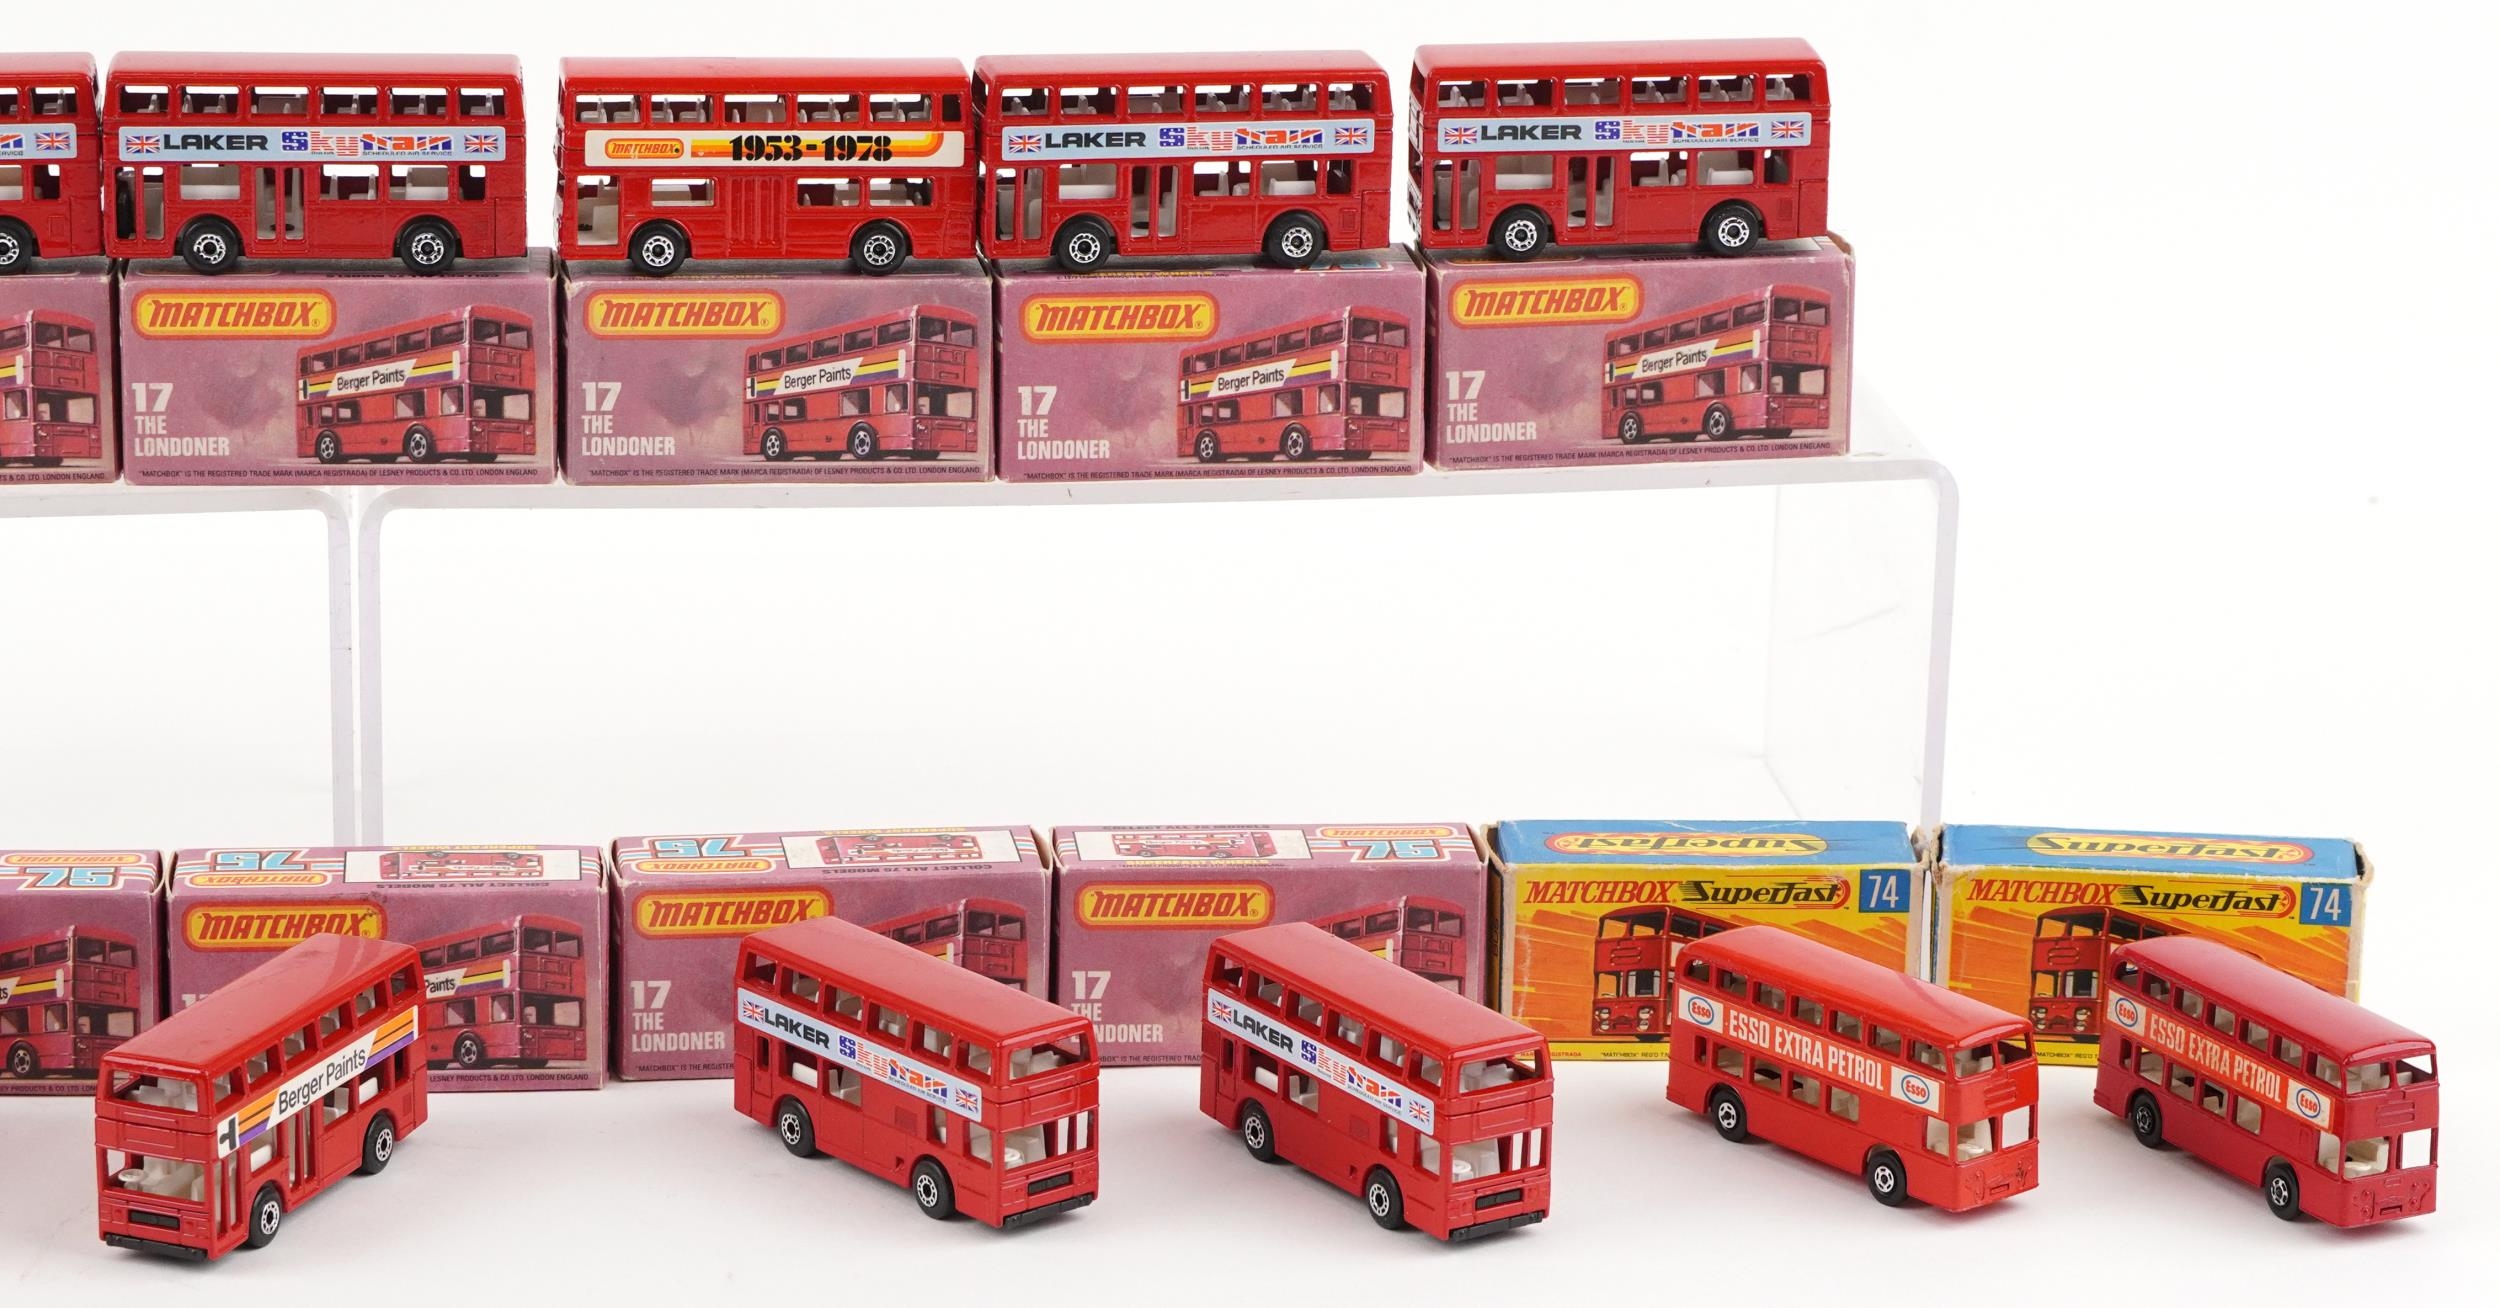 Seventeen vintage Matchbox diecast vehicles with boxes including sixteen Buses, numbers 17, 74 and 5 - Image 3 of 3